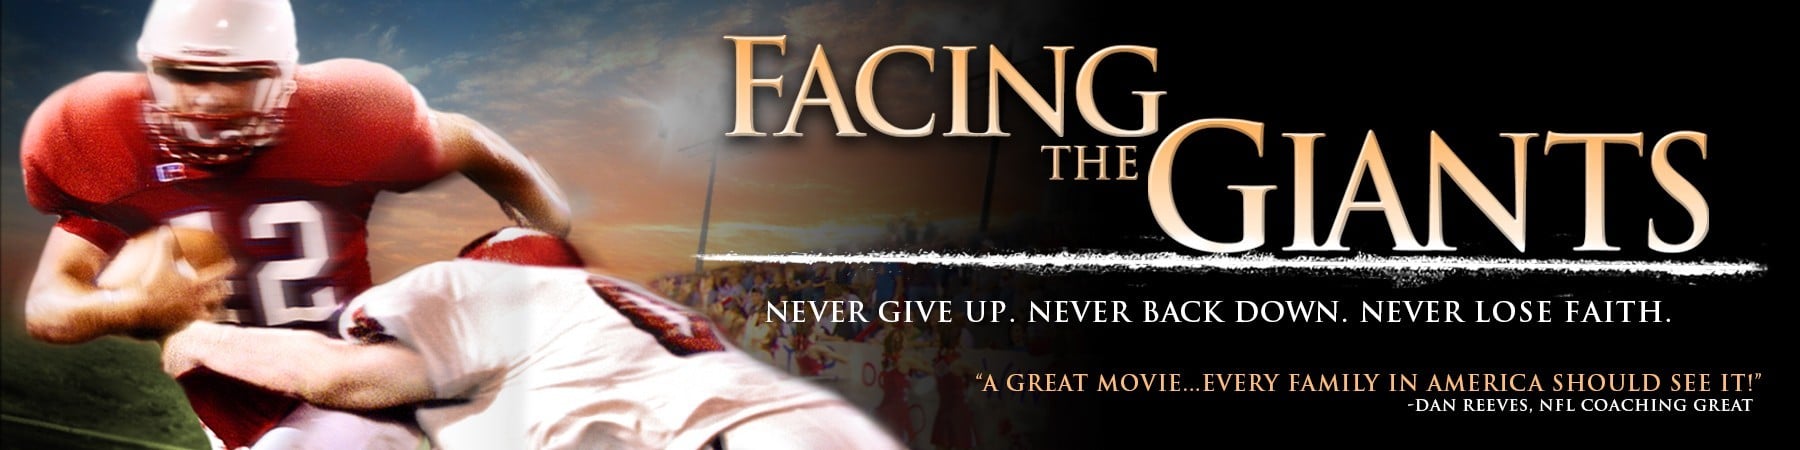 FACING THE GIANTS